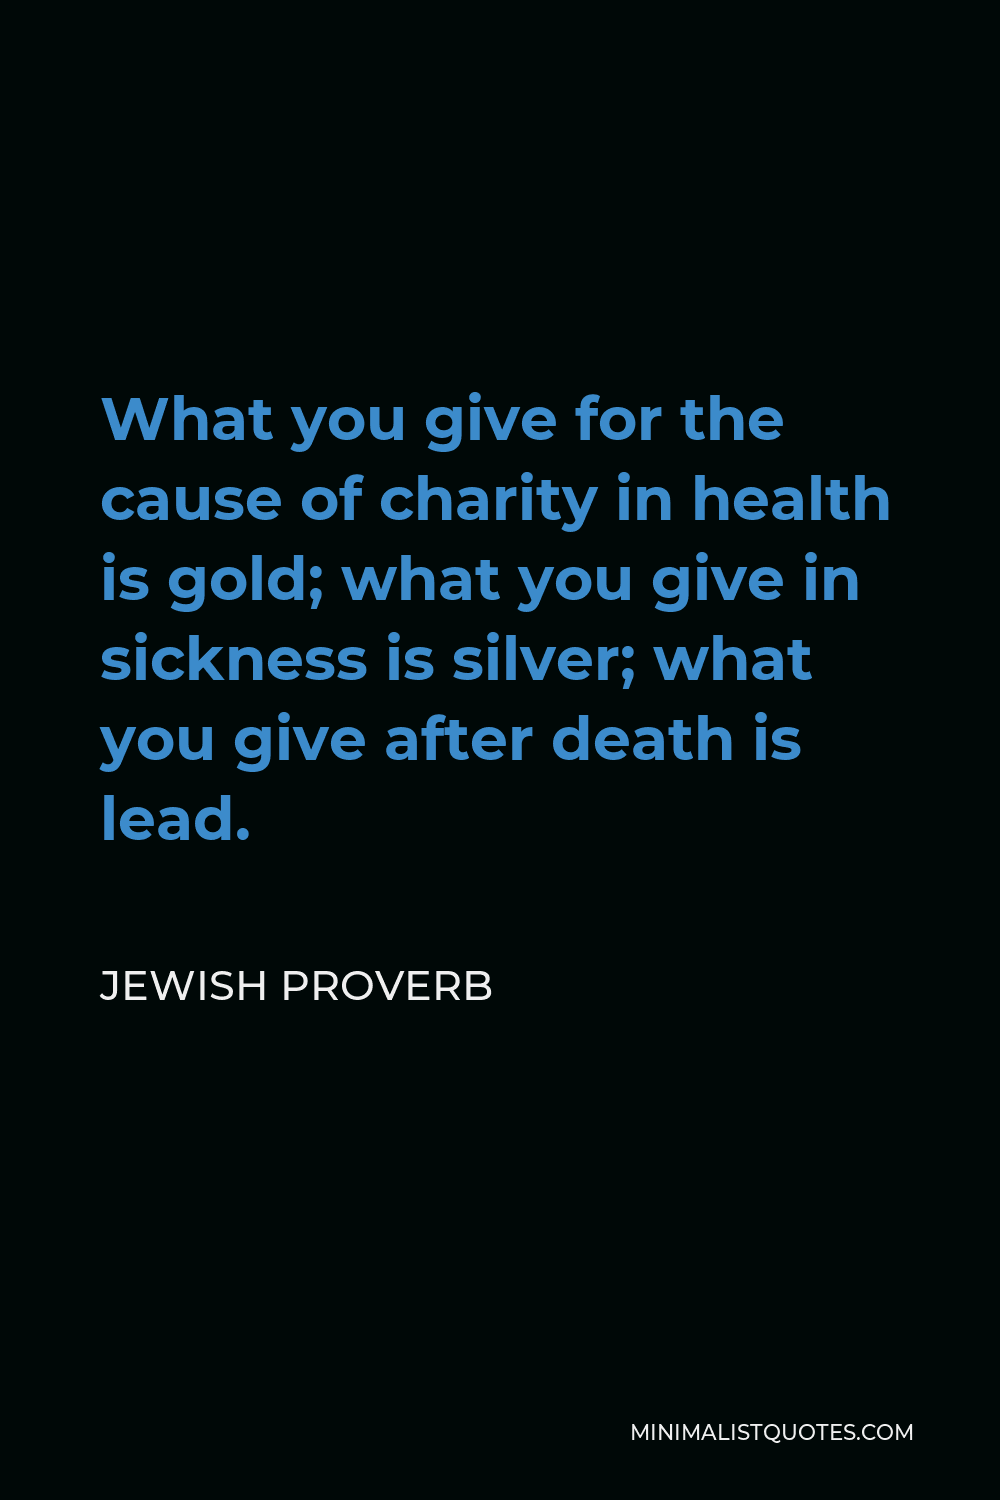 Jewish Proverb Quote - What you give for the cause of charity in health is gold; what you give in sickness is silver; what you give after death is lead.